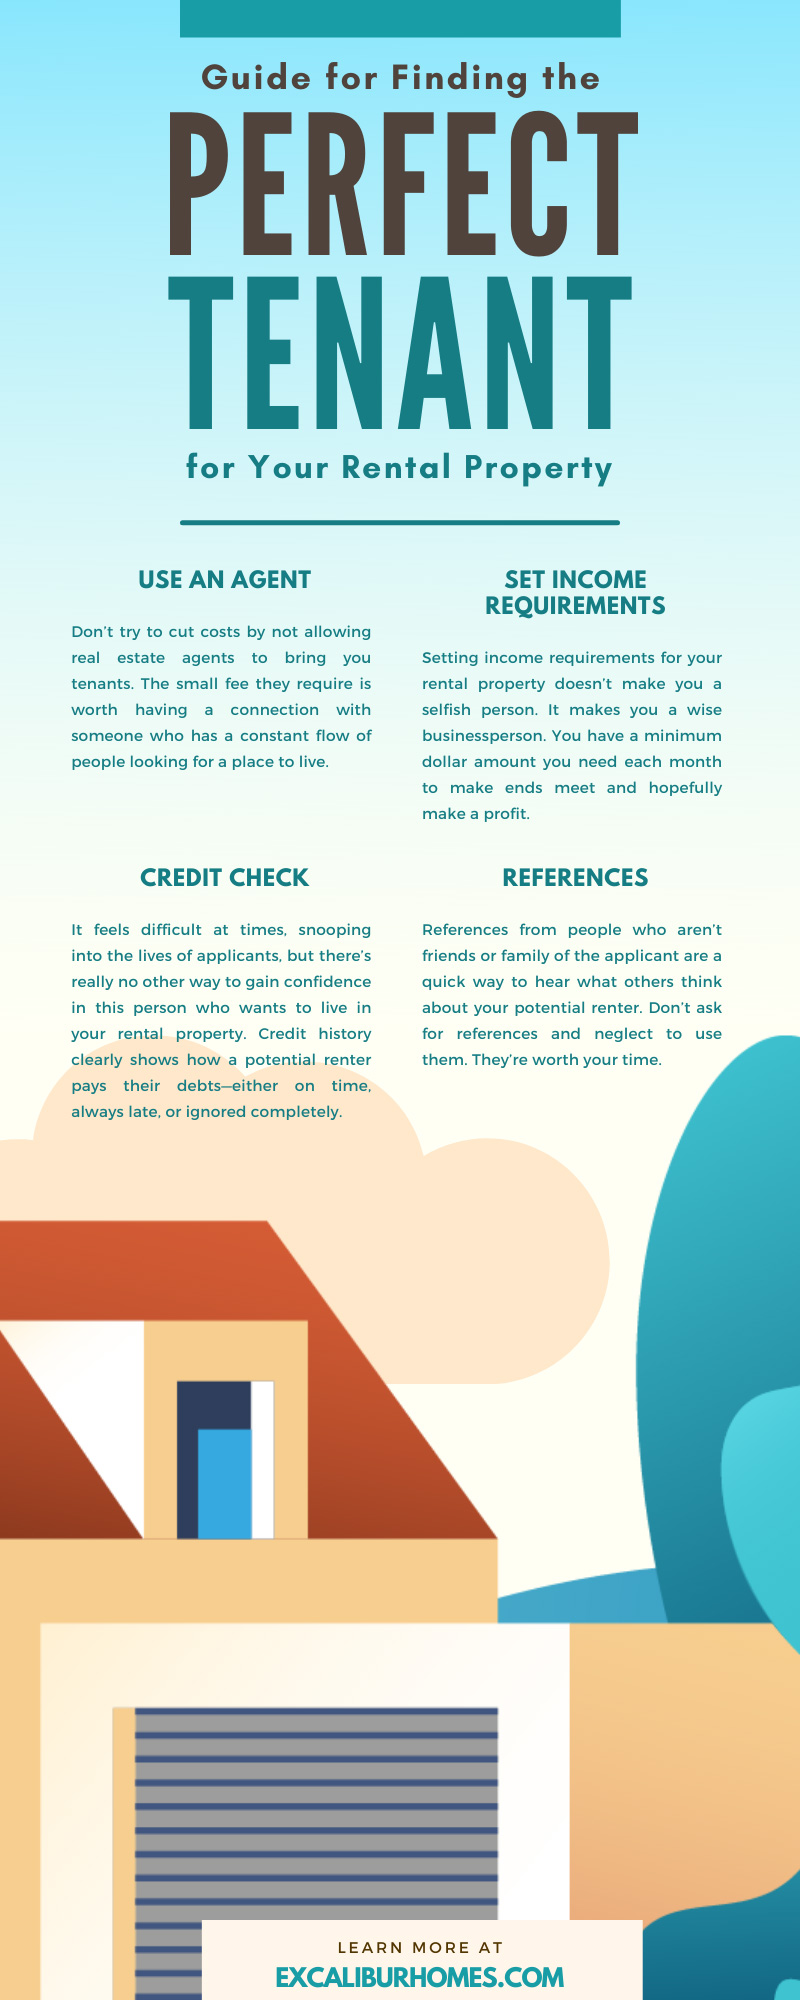 Guide for Finding the Perfect Tenant for Your Rental Property